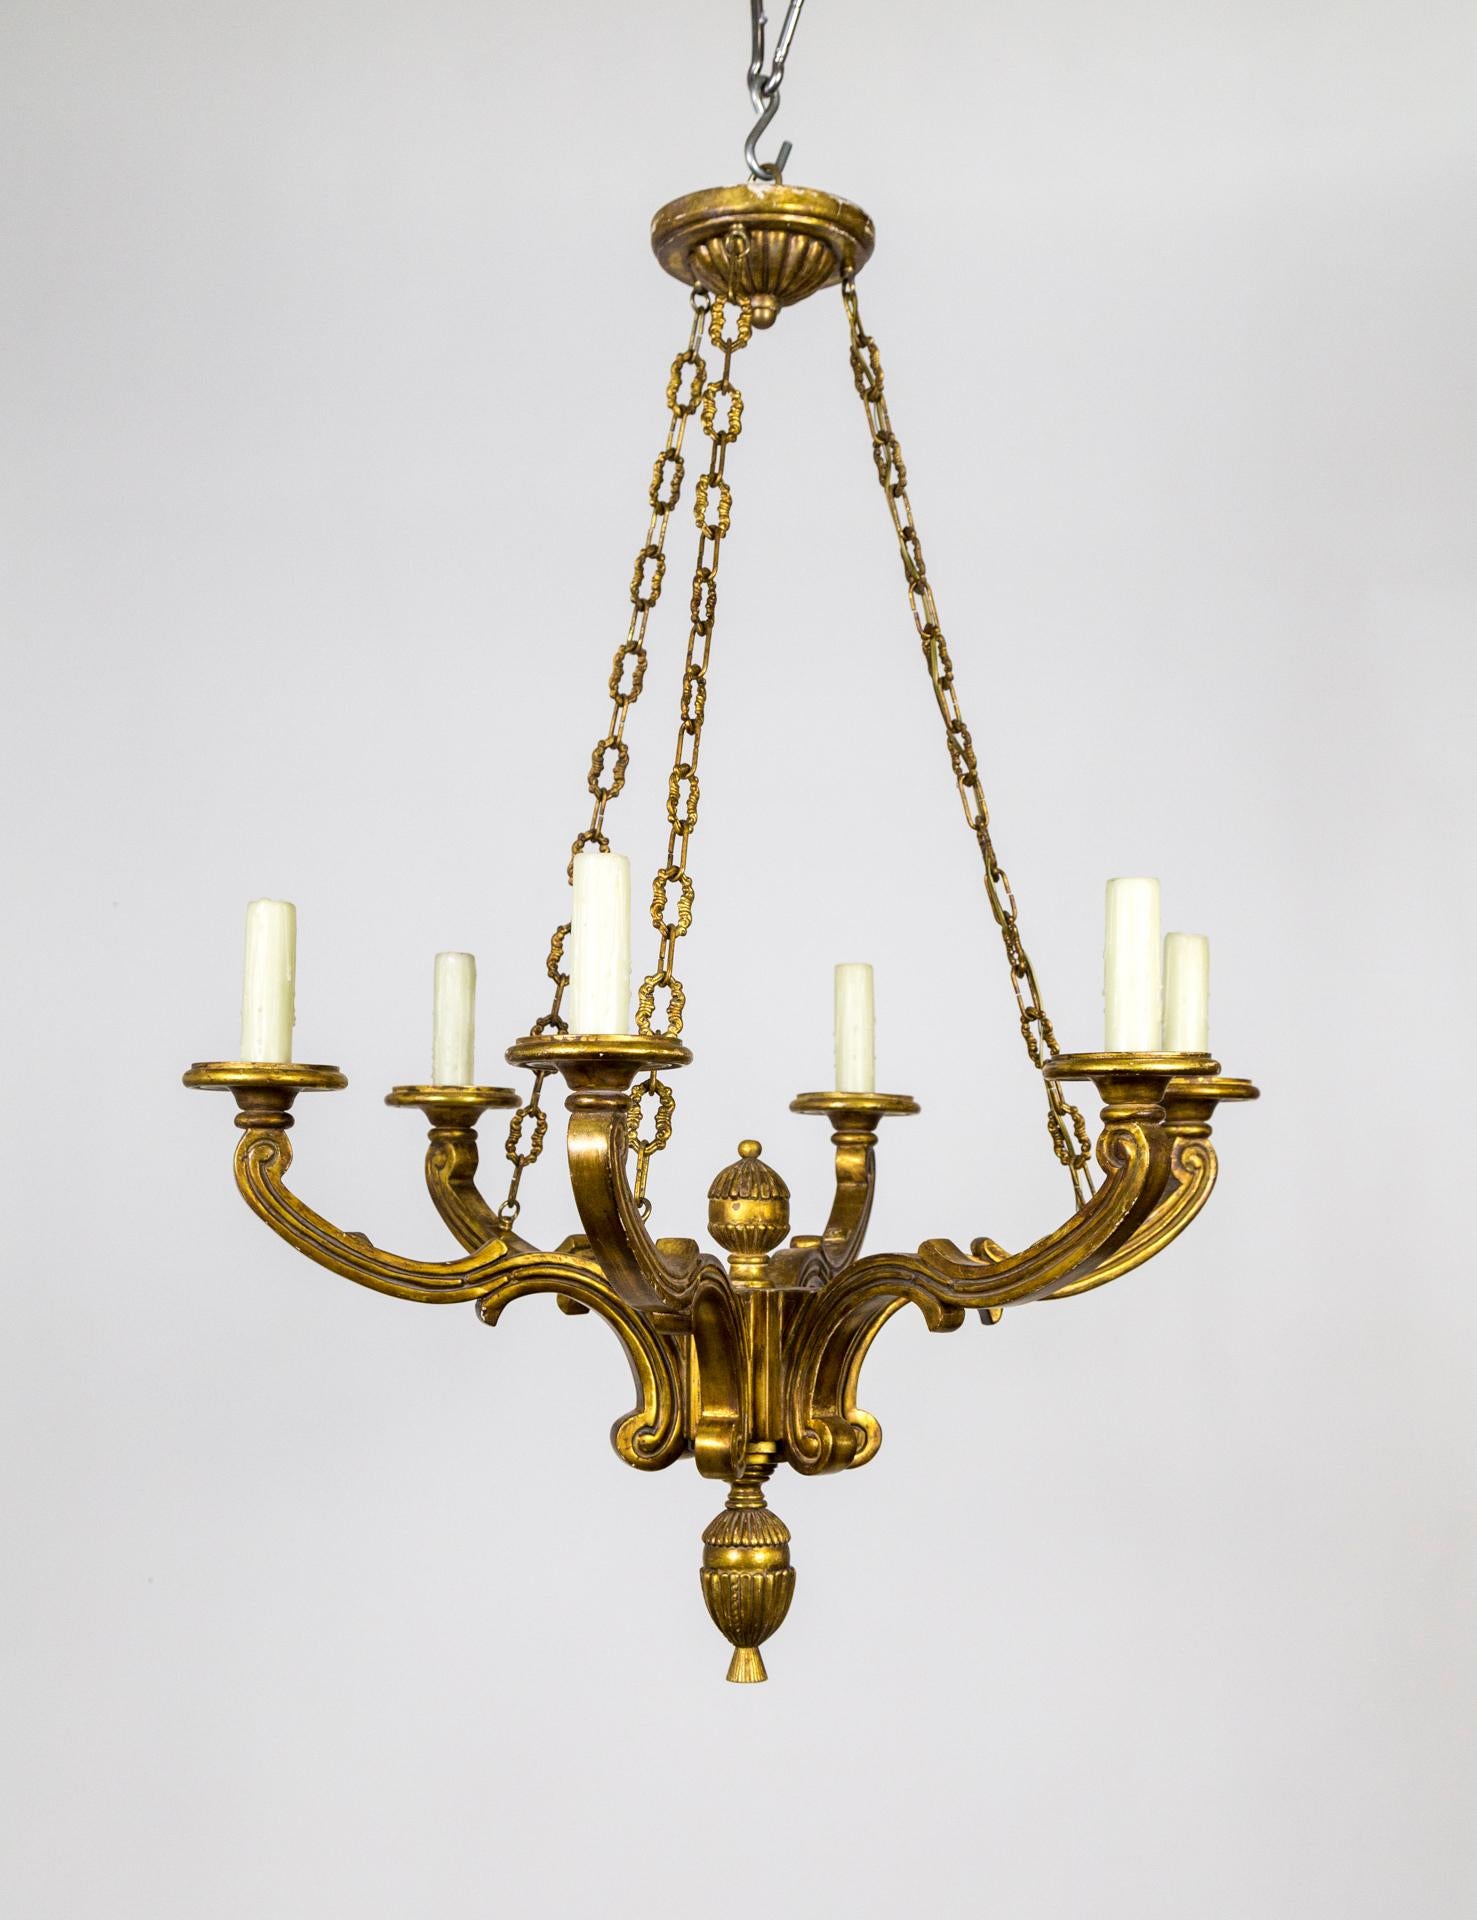 A vintage, gilt, carved wood chandelier with 6 arms in Regency Style by Panache Designs for Michael Taylor.  A timeless design. Newly rewired with matching decorative brass chain and canopy. 1980s.
Pair available, sold individually. 
36” height x